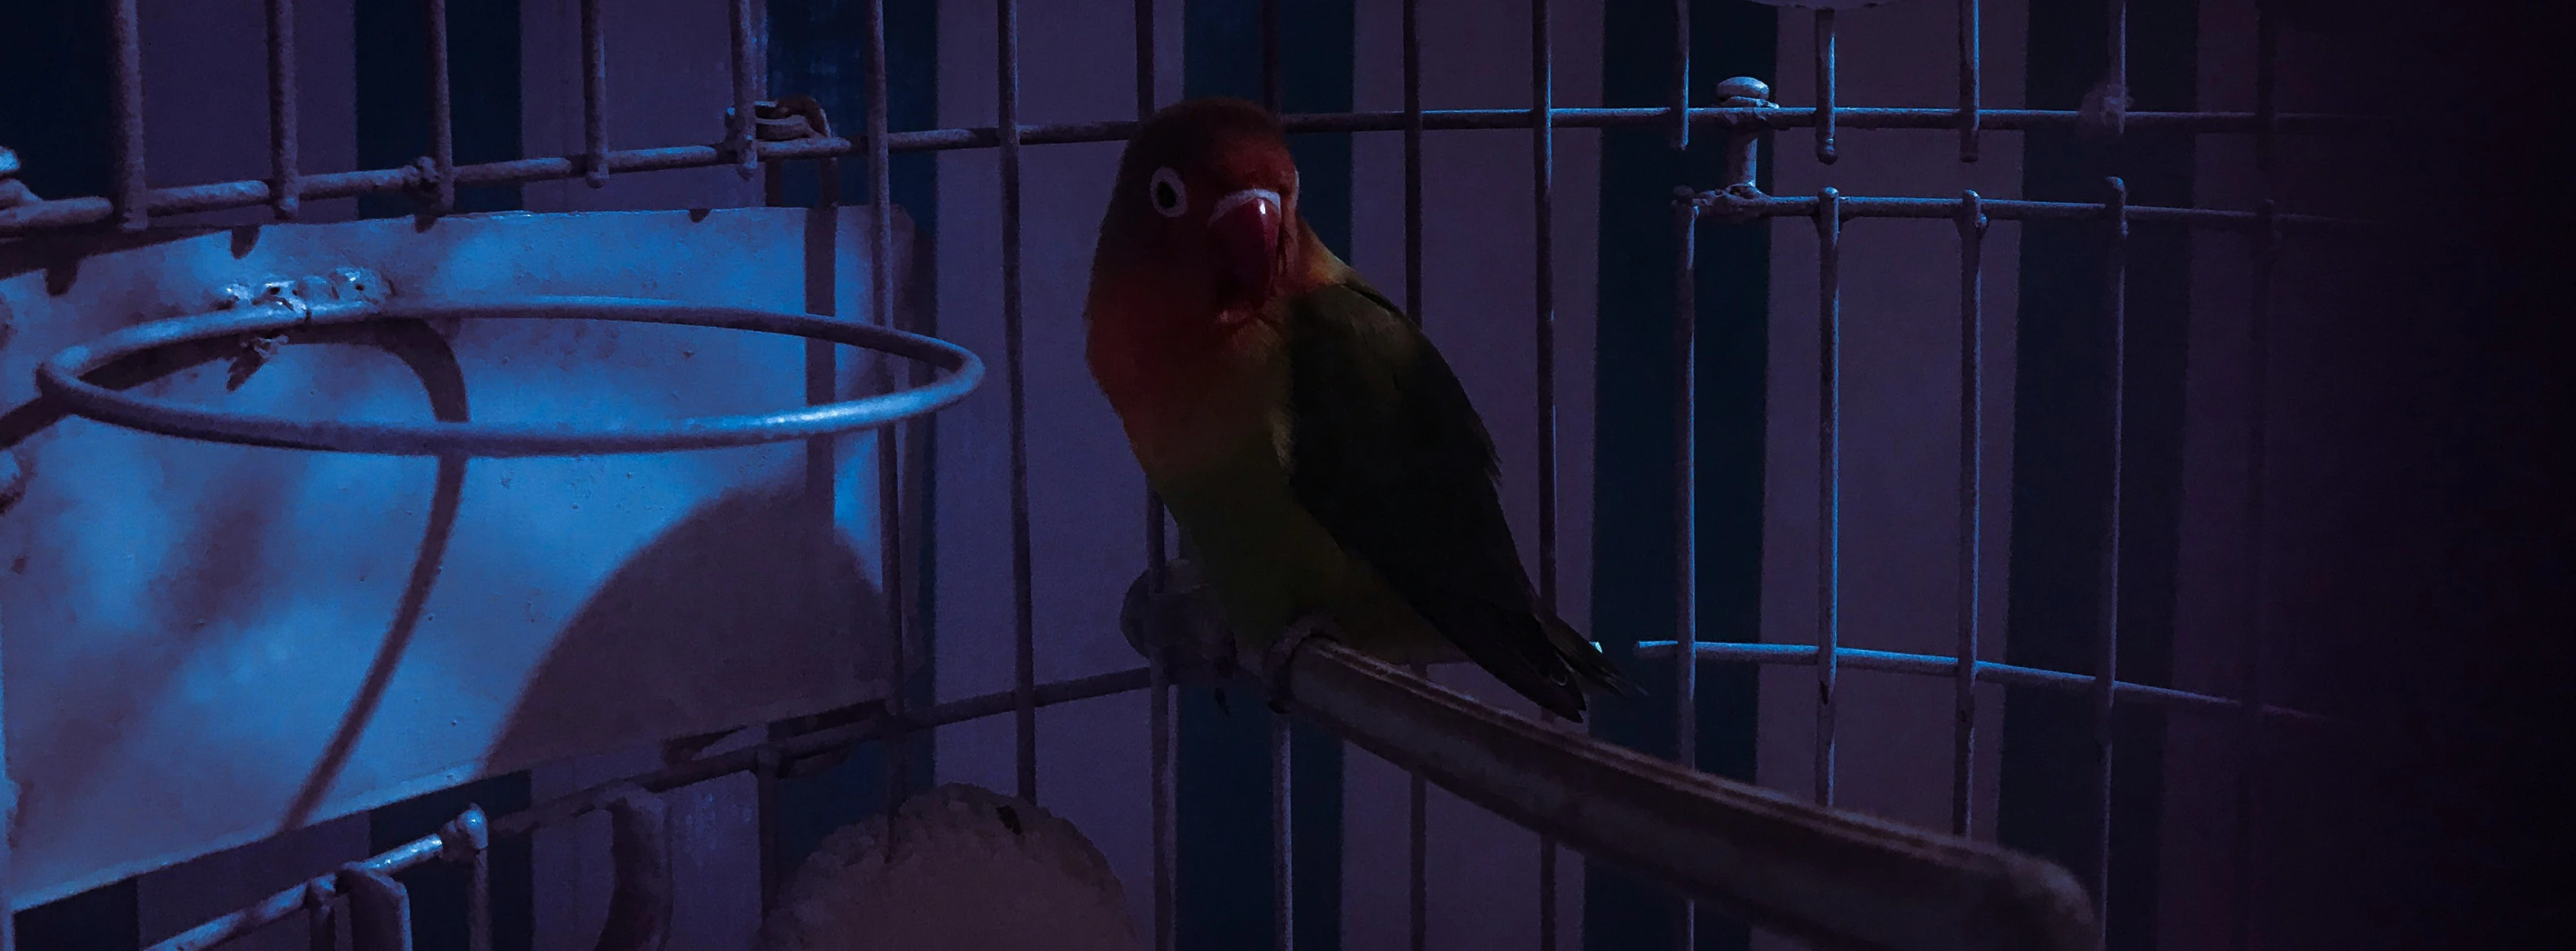 a bird in a cage is perched on a bar